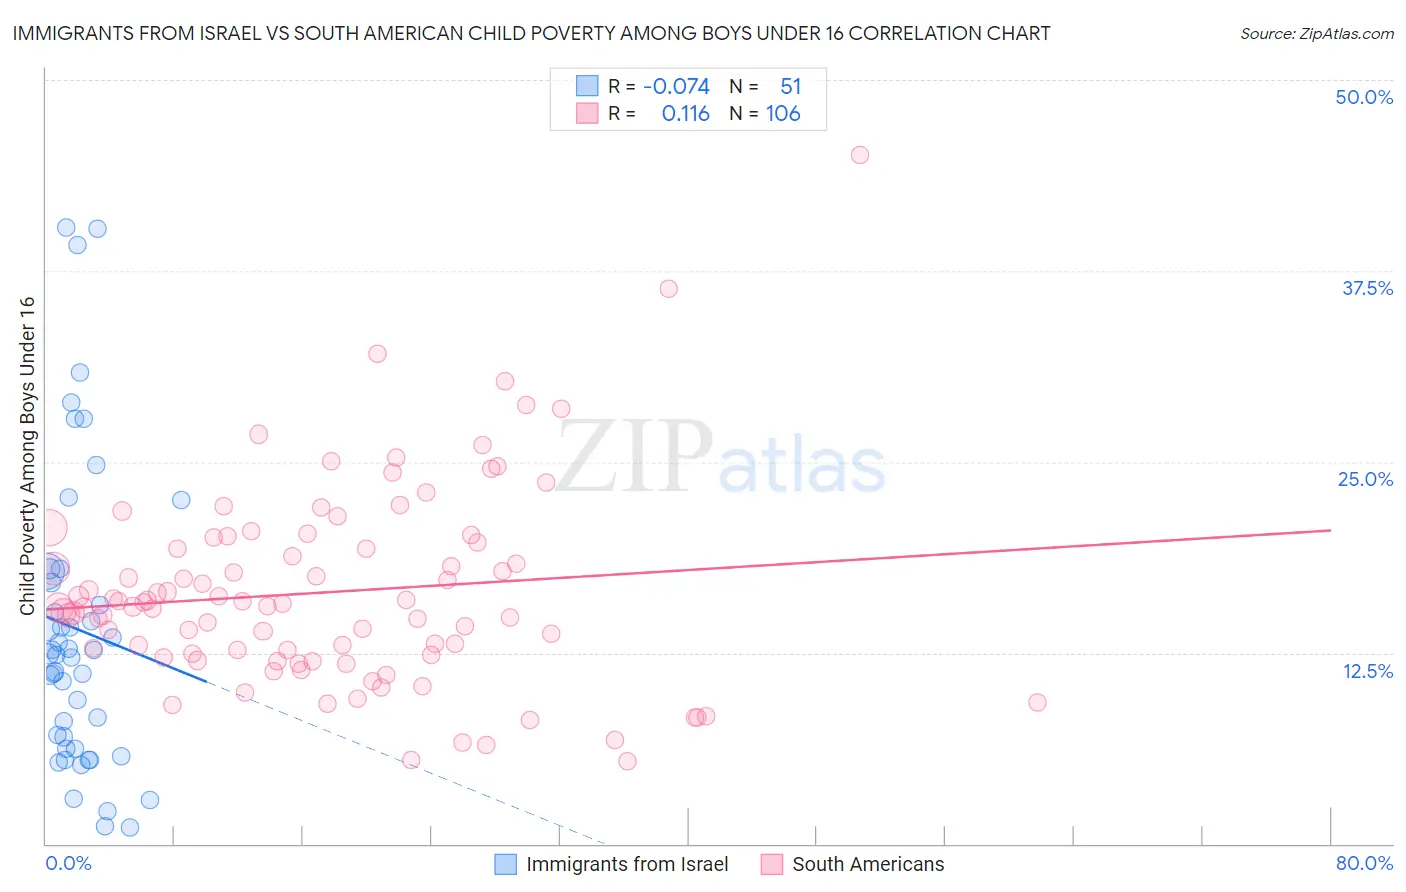 Immigrants from Israel vs South American Child Poverty Among Boys Under 16